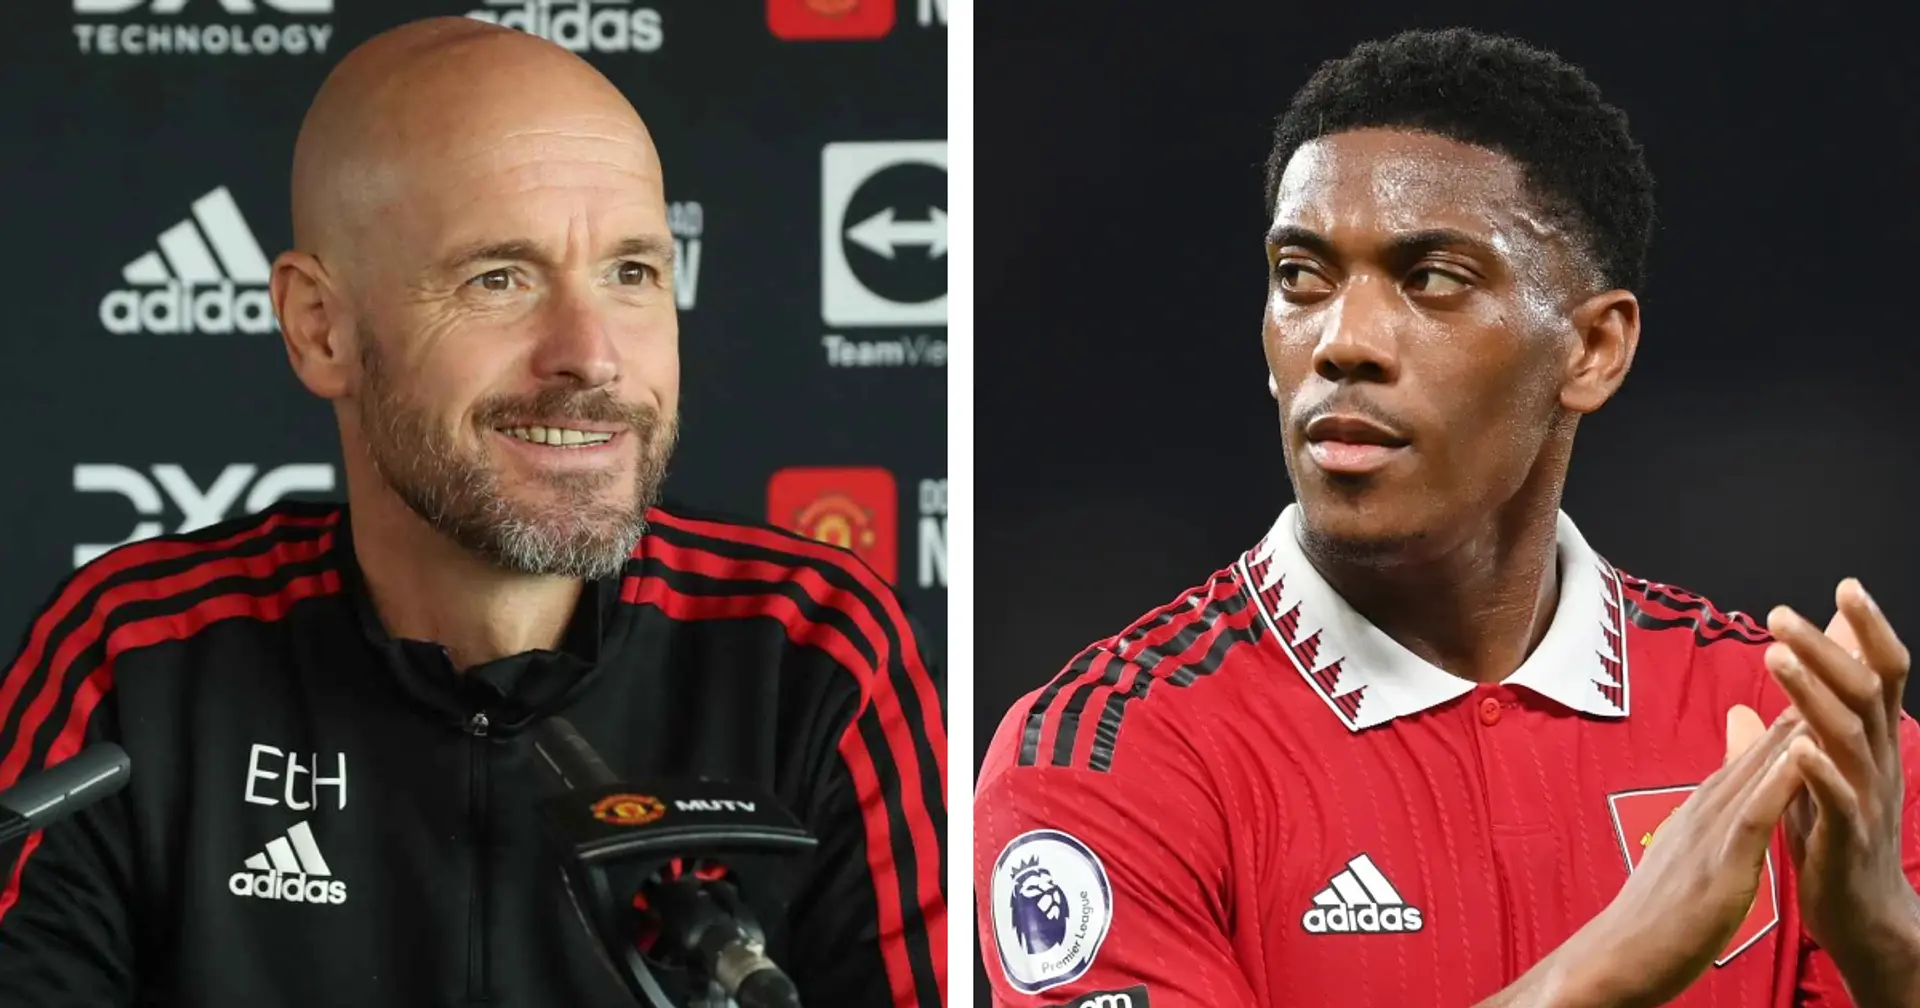 'In my way of playing I like the type': Ten Hag on Martial's form 